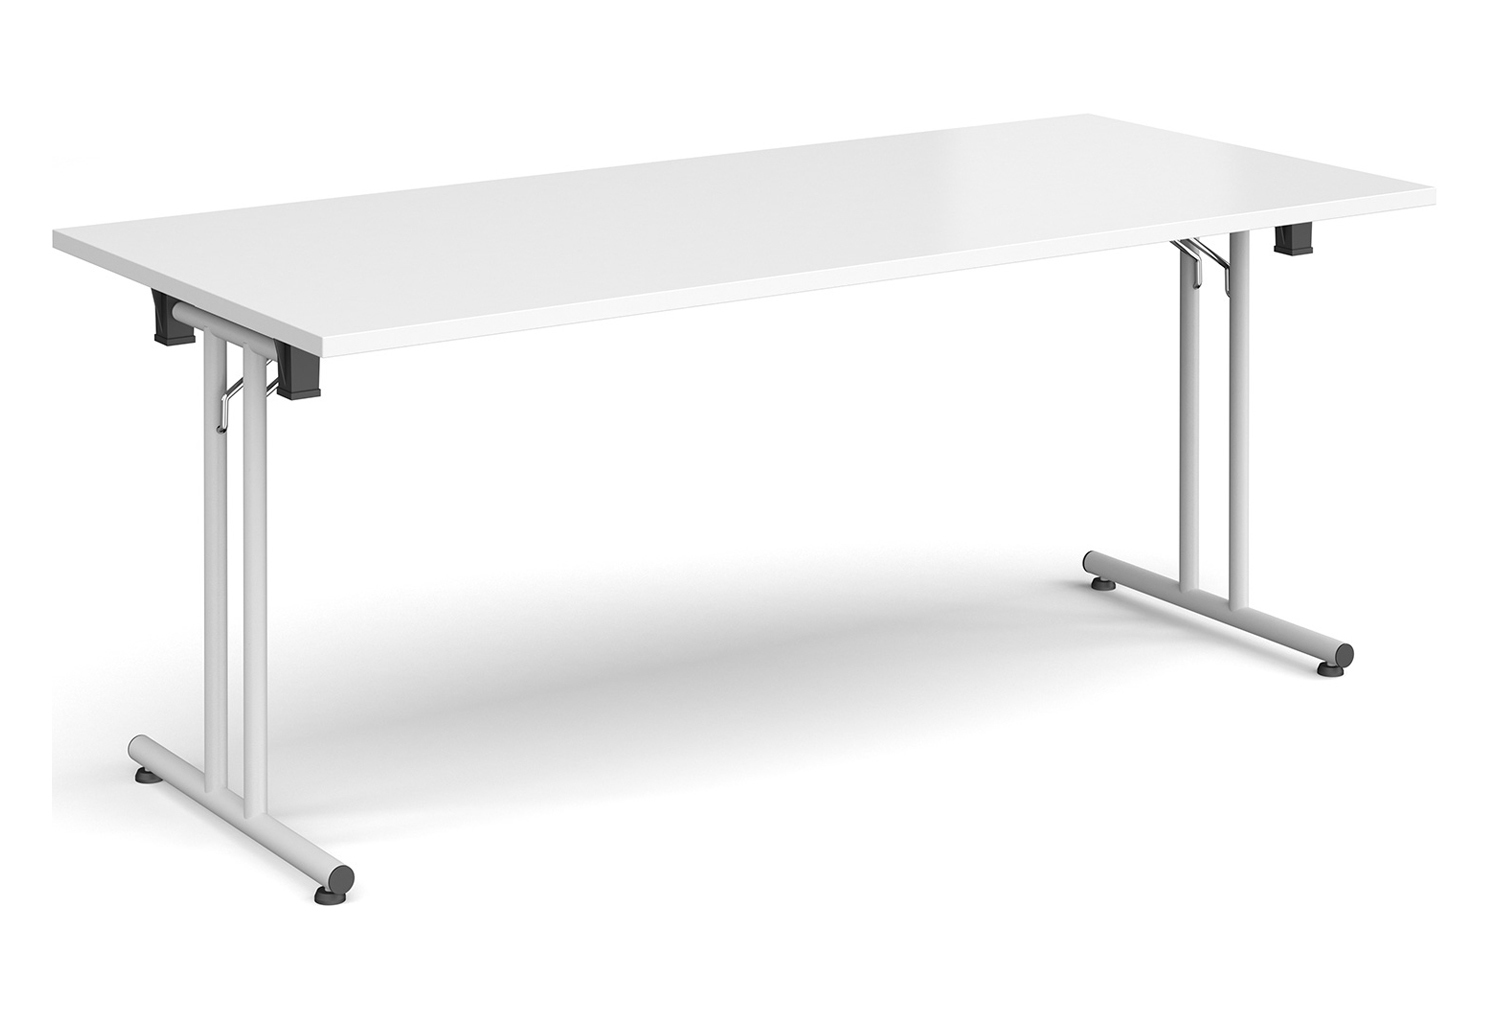 Durand Rectangular Folding Table, 180wx80dx73h (cm), White Frame, White, Express Delivery